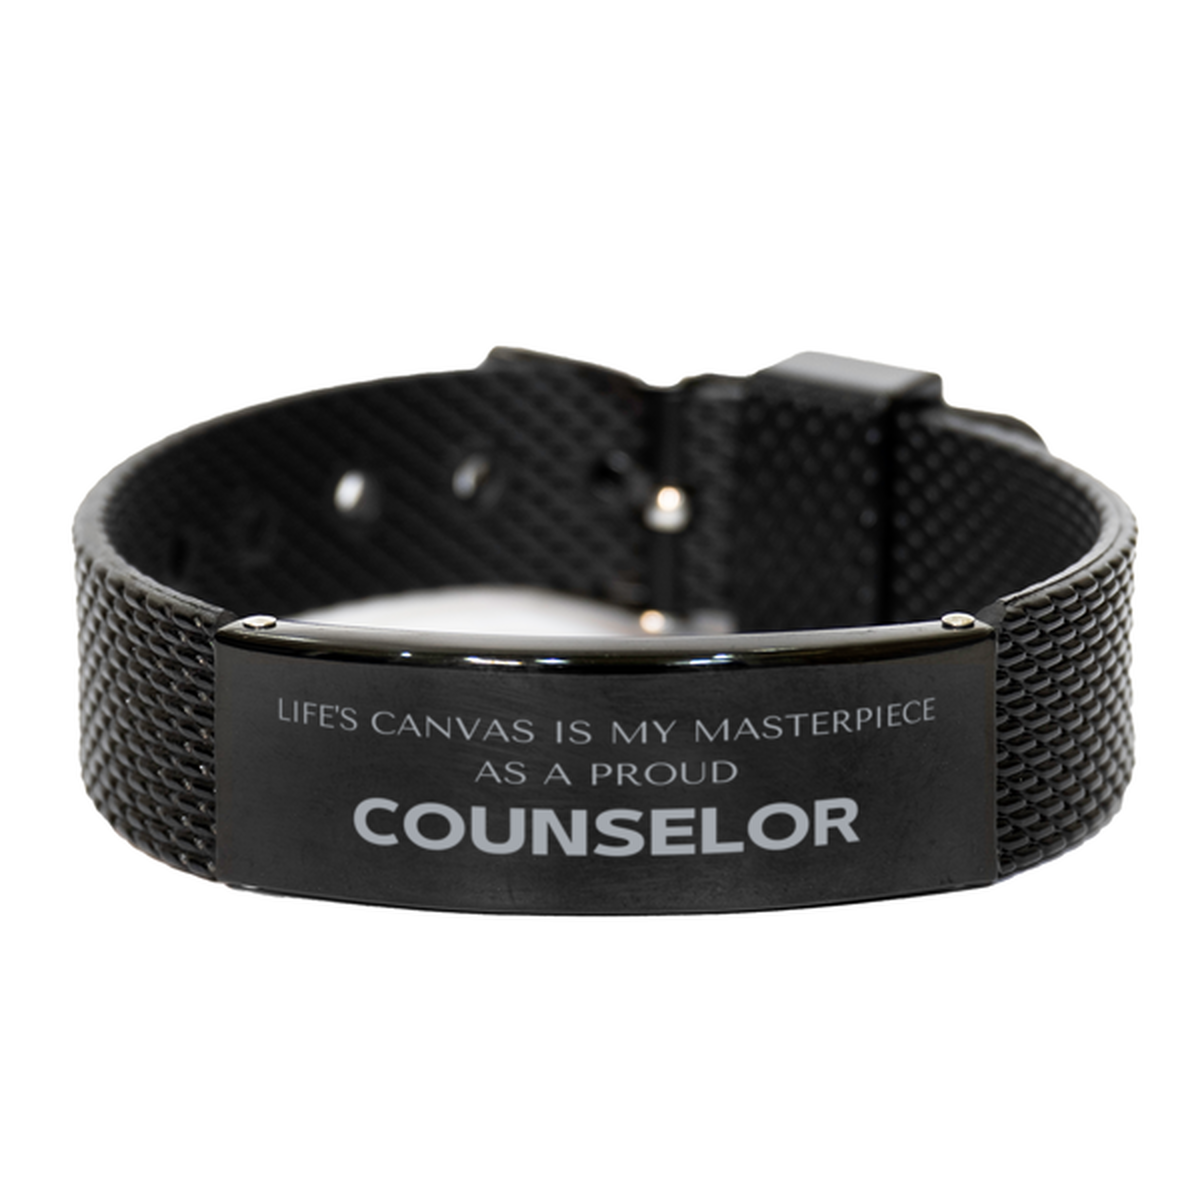 Proud Counselor Gifts, Life's canvas is my masterpiece, Epic Birthday Christmas Unique Black Shark Mesh Bracelet For Counselor, Coworkers, Men, Women, Friends